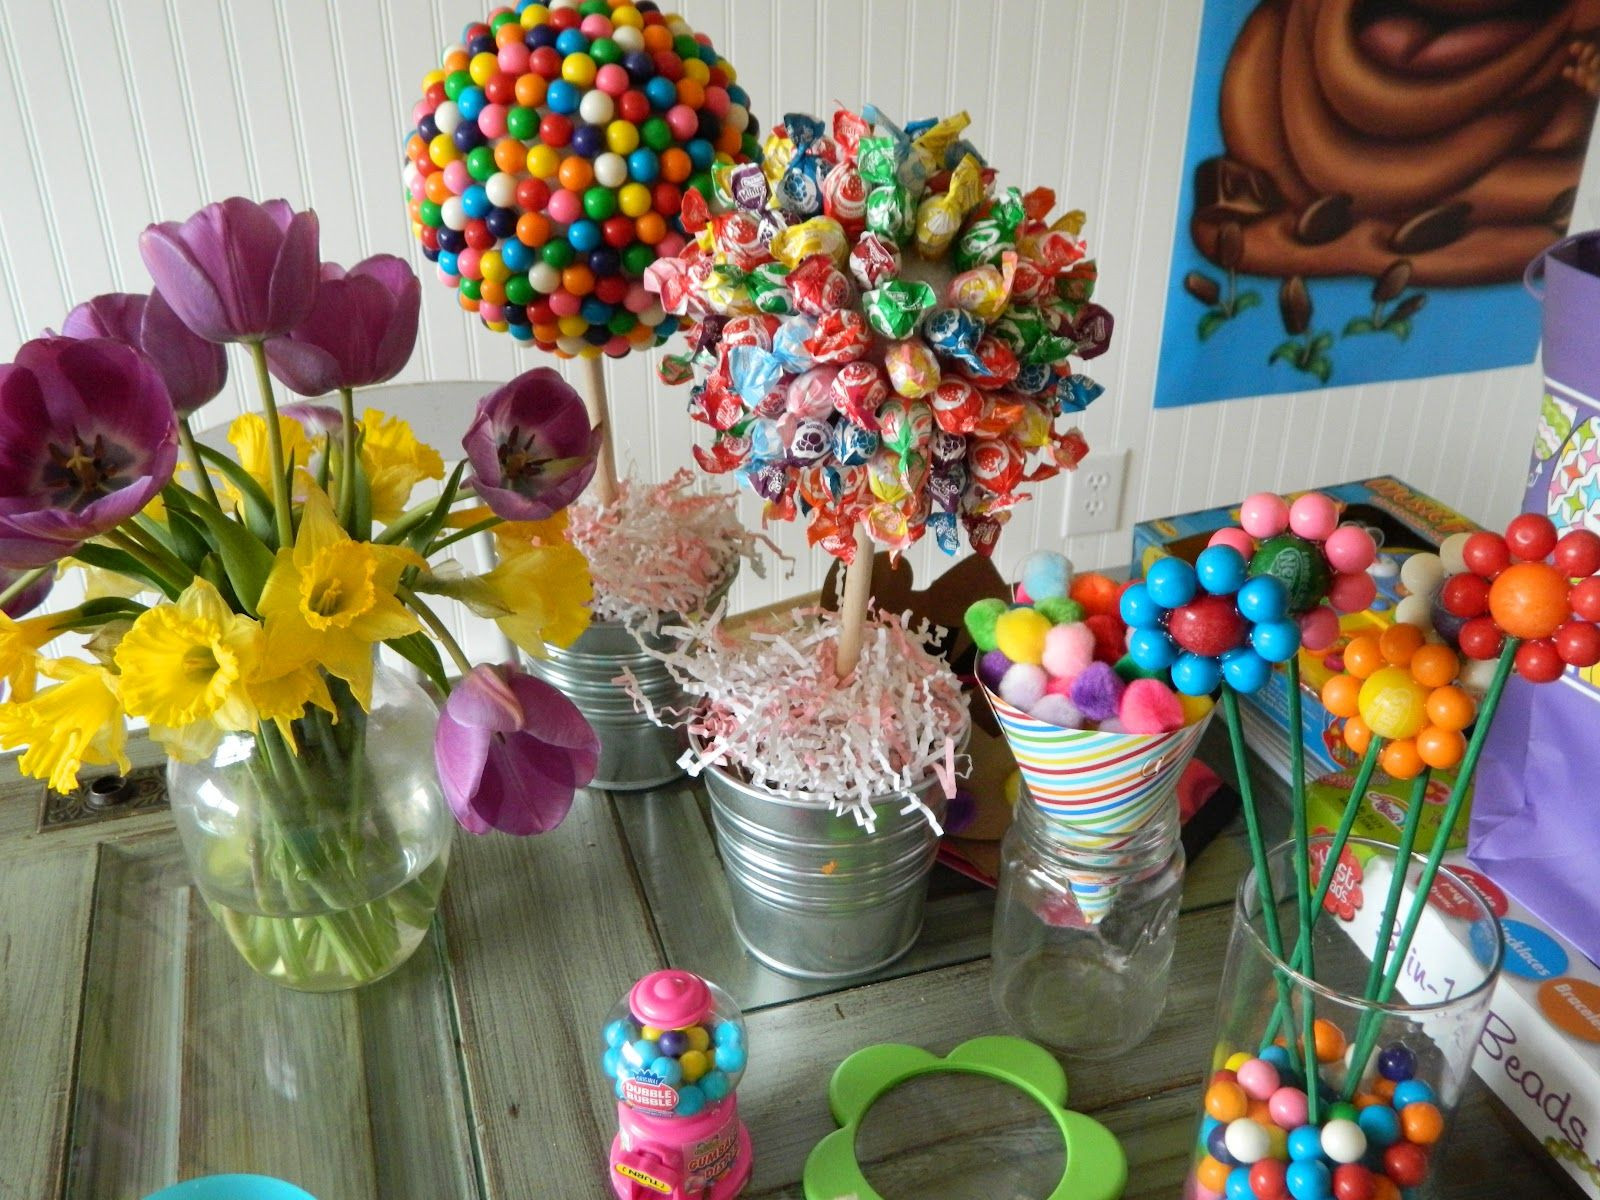 Candyland Birthday Party Ideas
 Image result for candyland party ideas